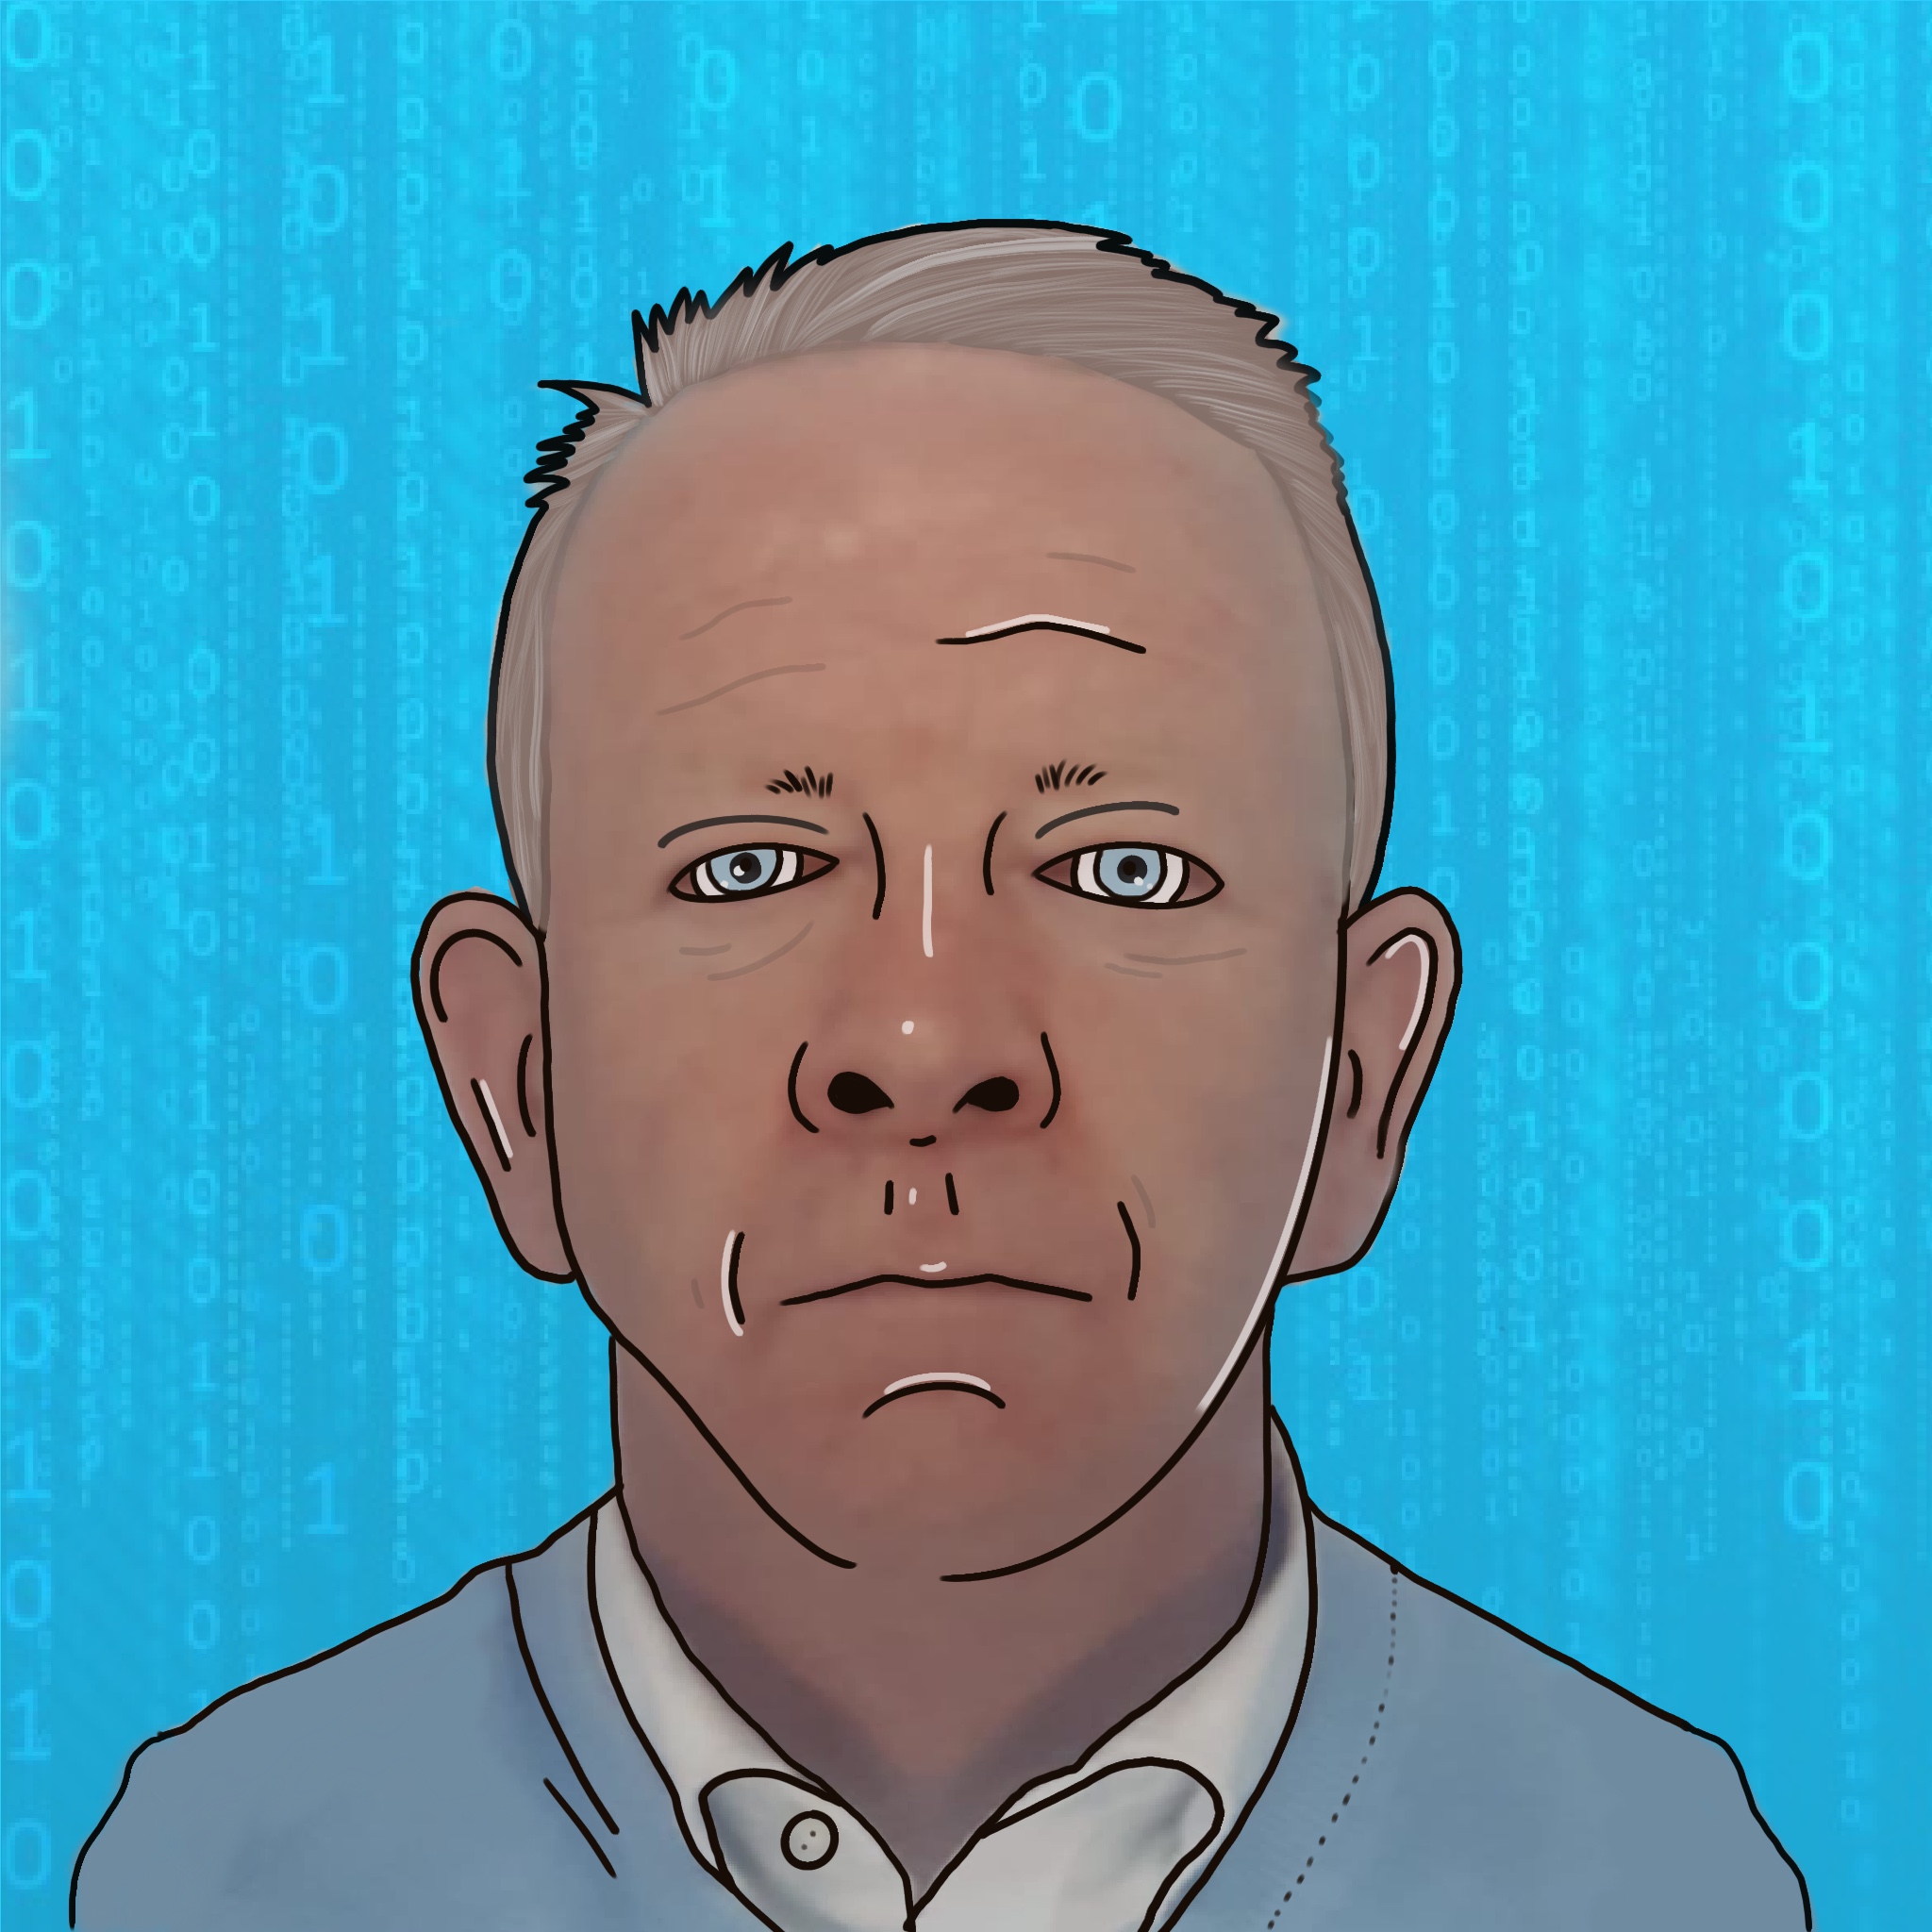 Kev, the Managing Director and Founder of Trust Networks Ltd as a cartoon photograph.